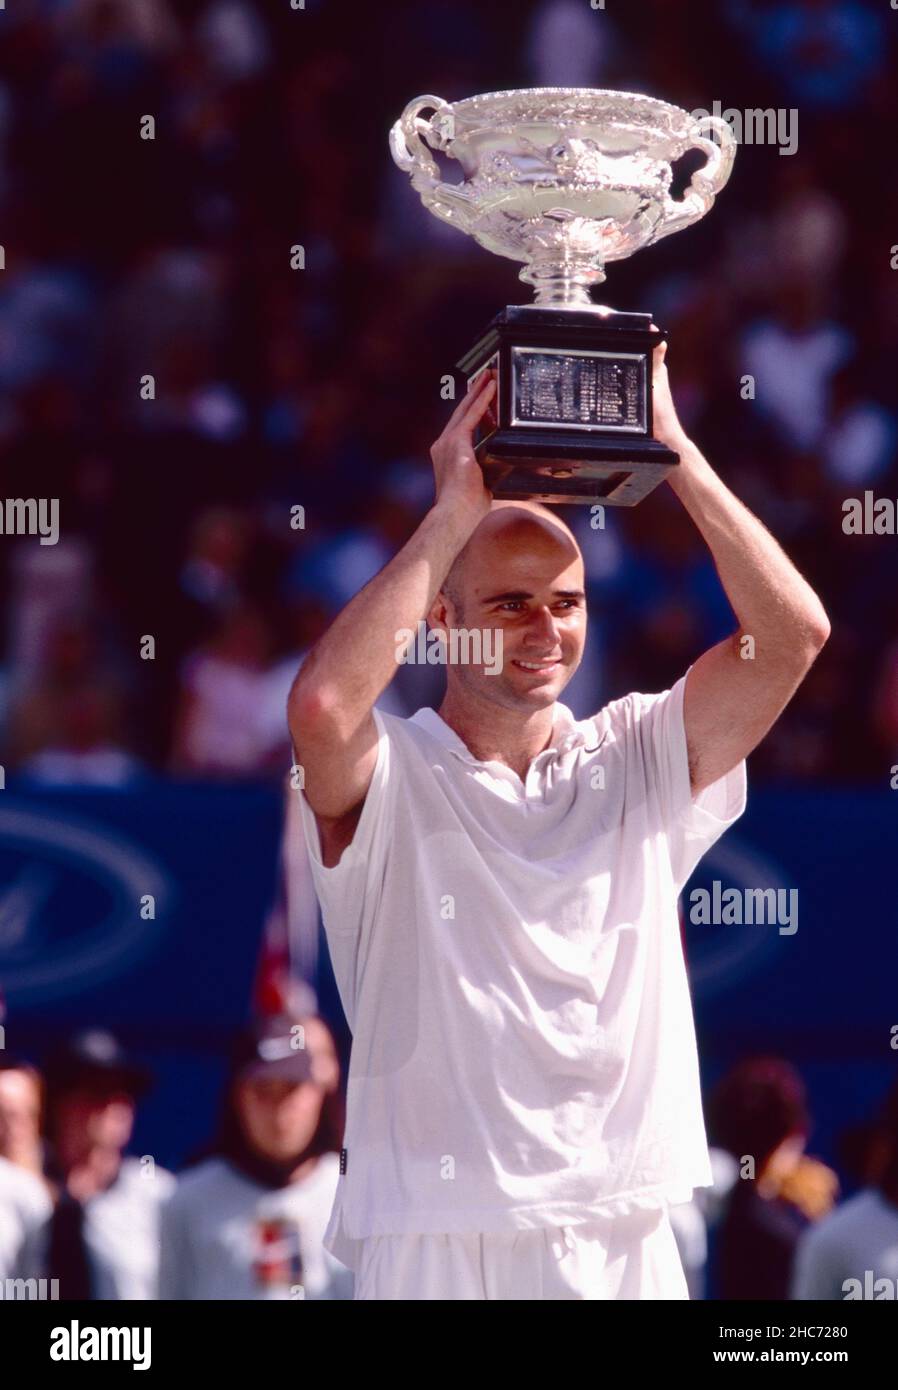 American tennis player Andre Agassi, 2000s Stock Photo